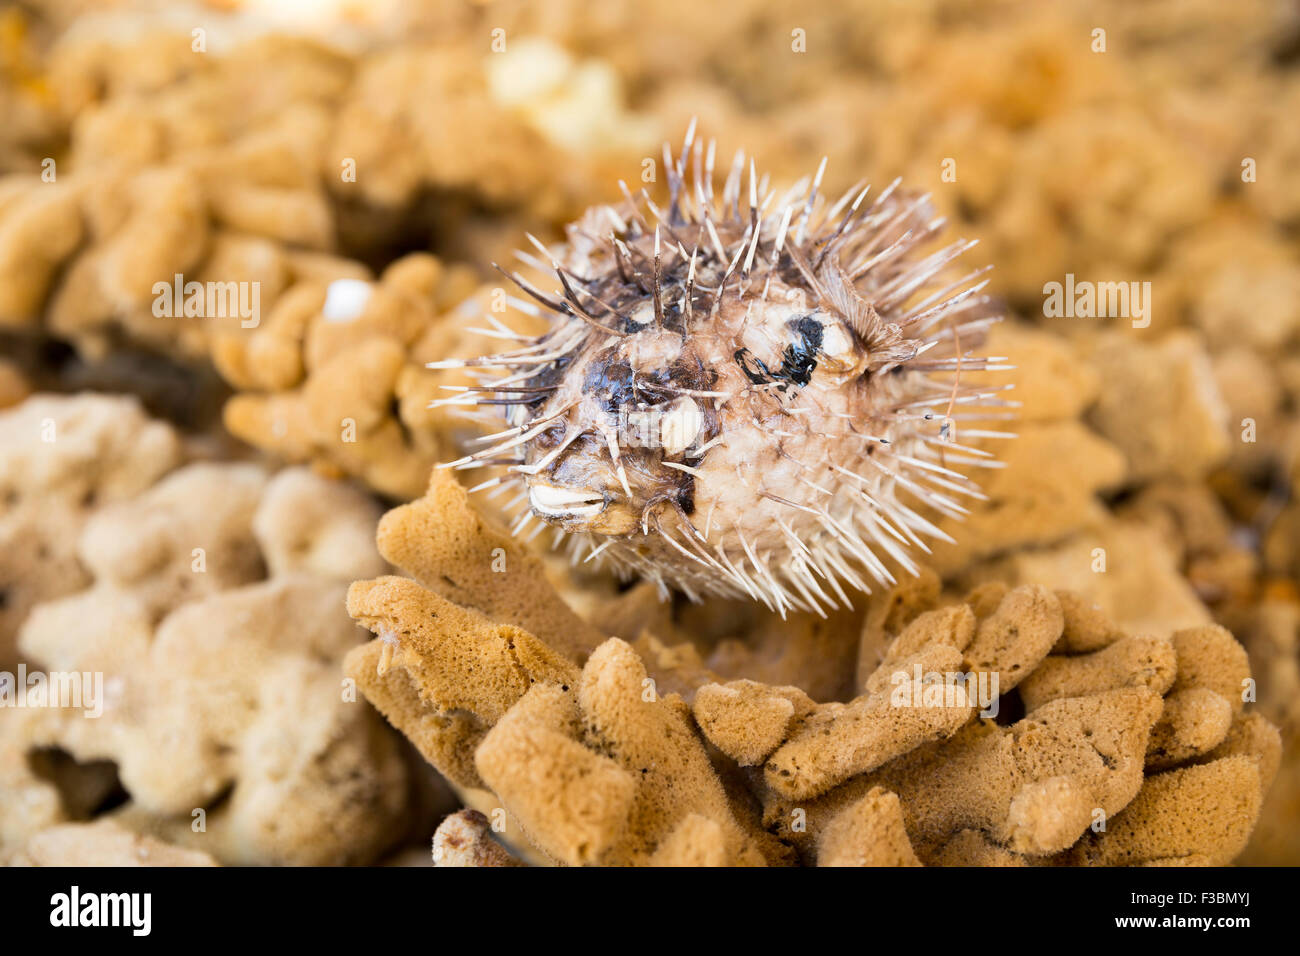 Lifeless dried puffer fish on a brown colored sea sponges Stock Photo